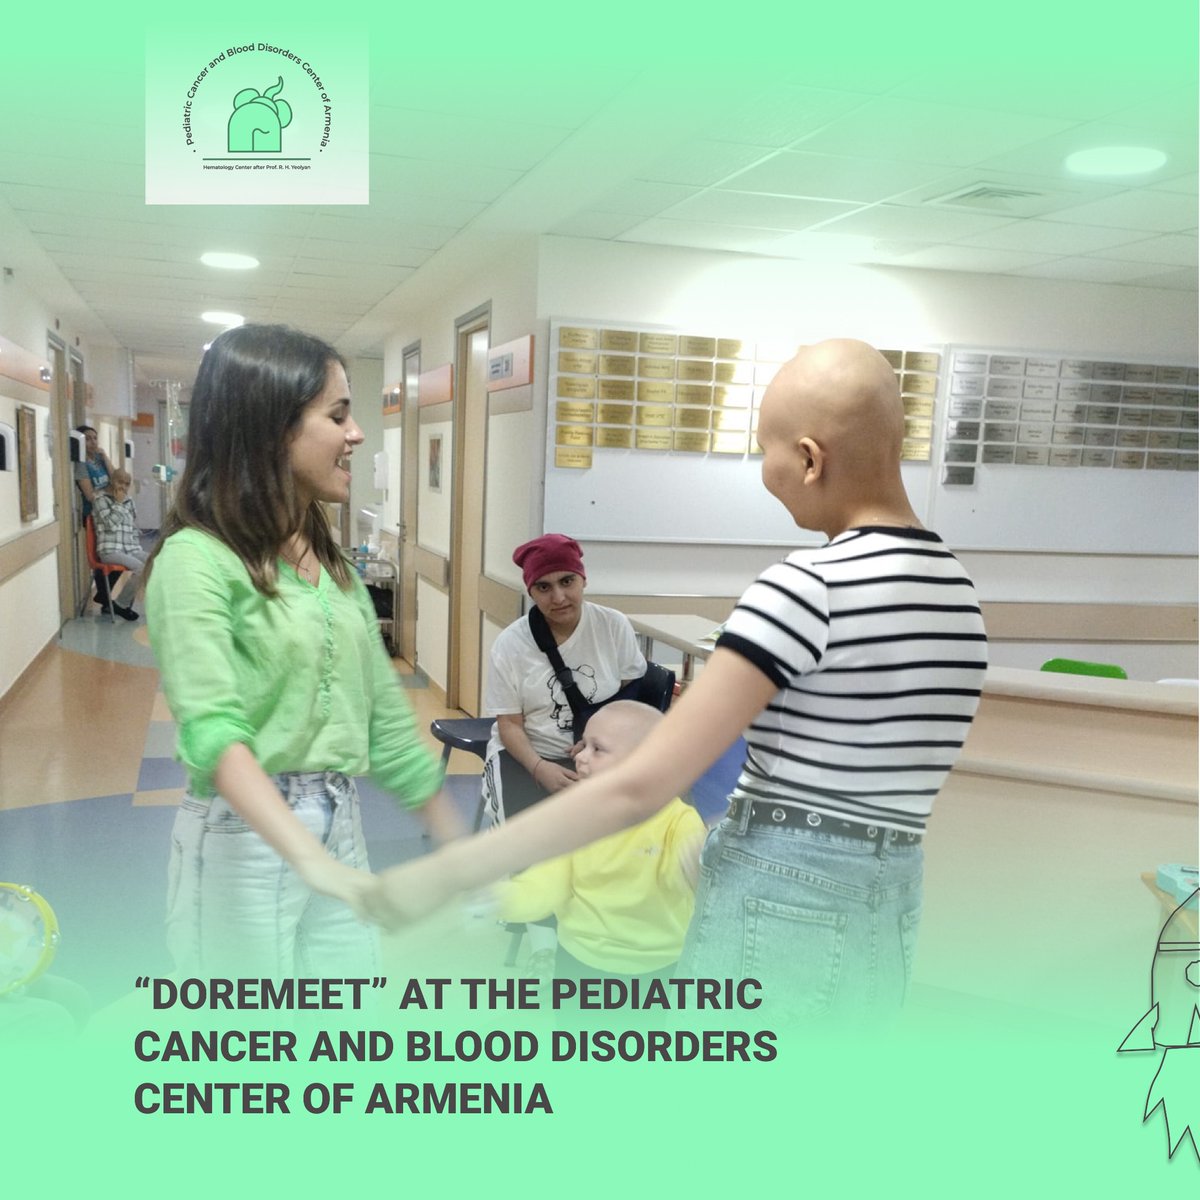 The Pediatric Cancer and Blood Disorders Center of Armenia once again hosted 'Do Re Meet' NGO to celebrate a therapeutic and musical day at the Center.